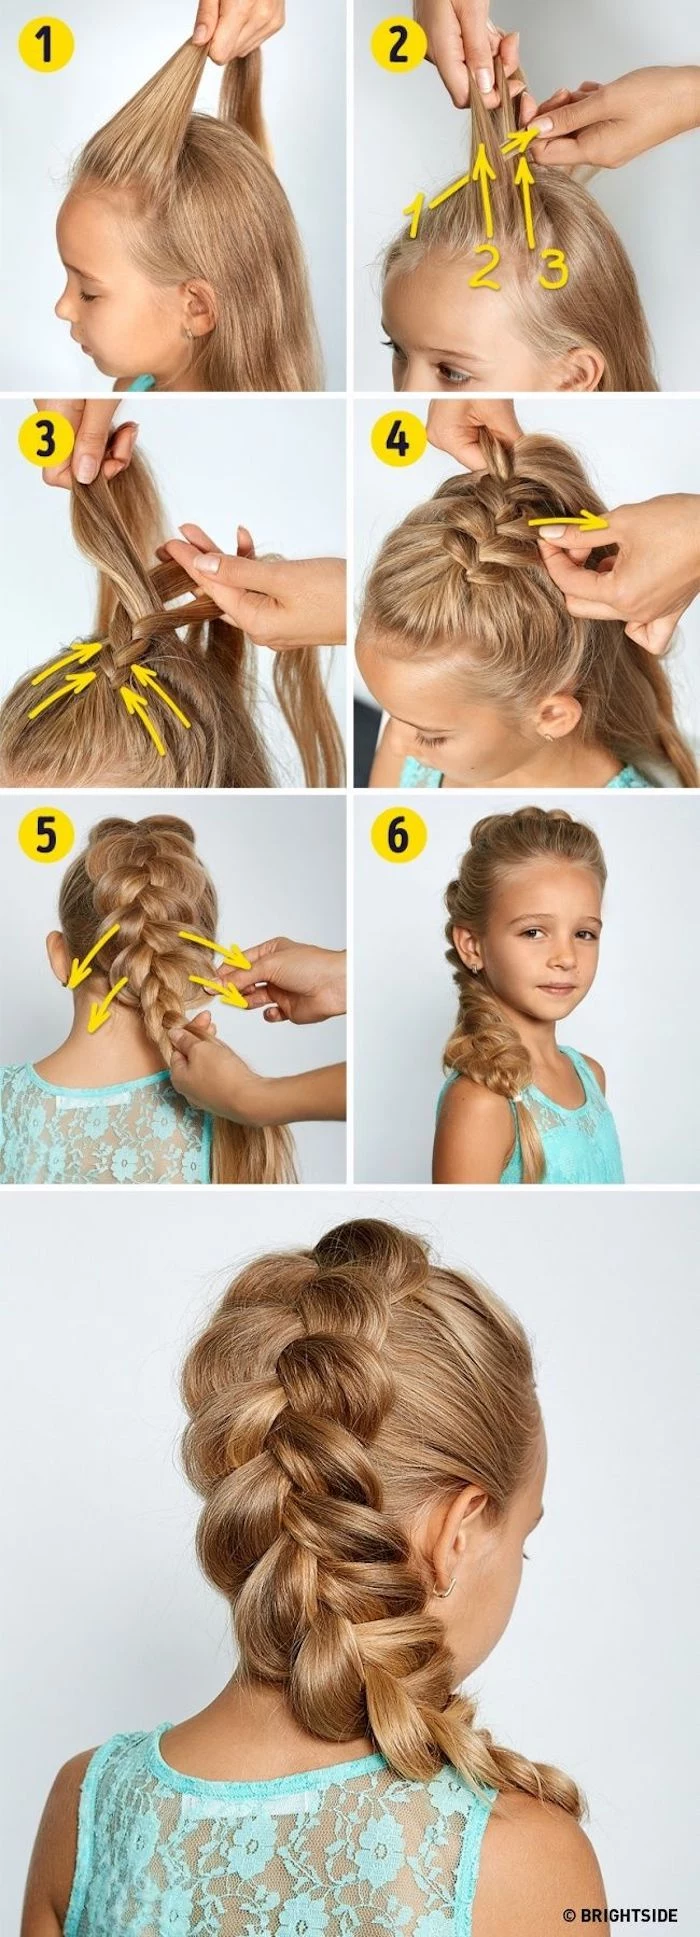 turquoise top, white background, braided hairstyles for little girls, step by step tutorial, long blonde hair in a braid